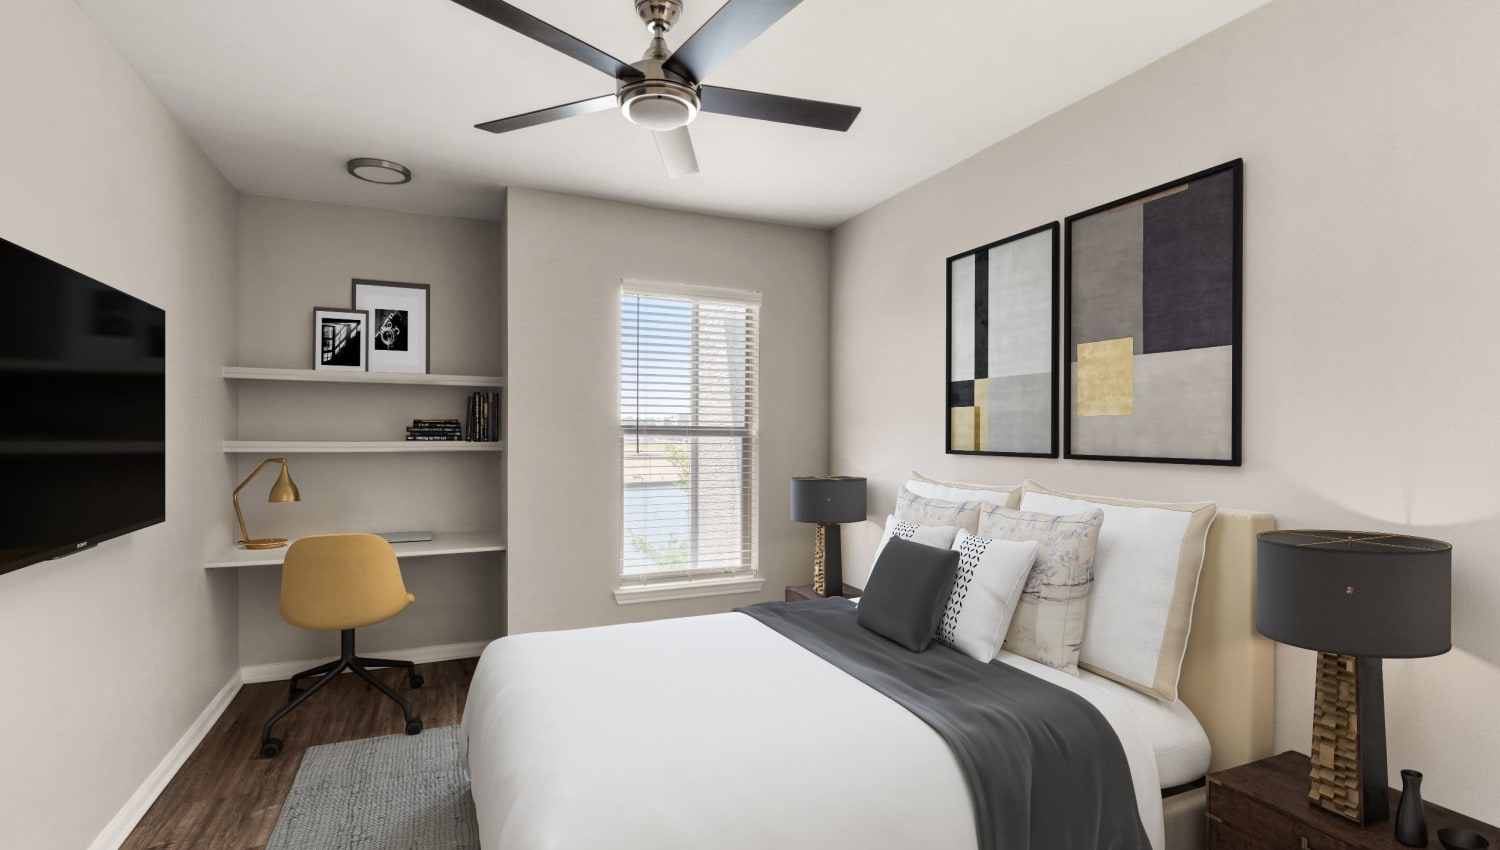 Well decorated model bedroom with office nook at Olympus Las Colinas in Irving, Texas